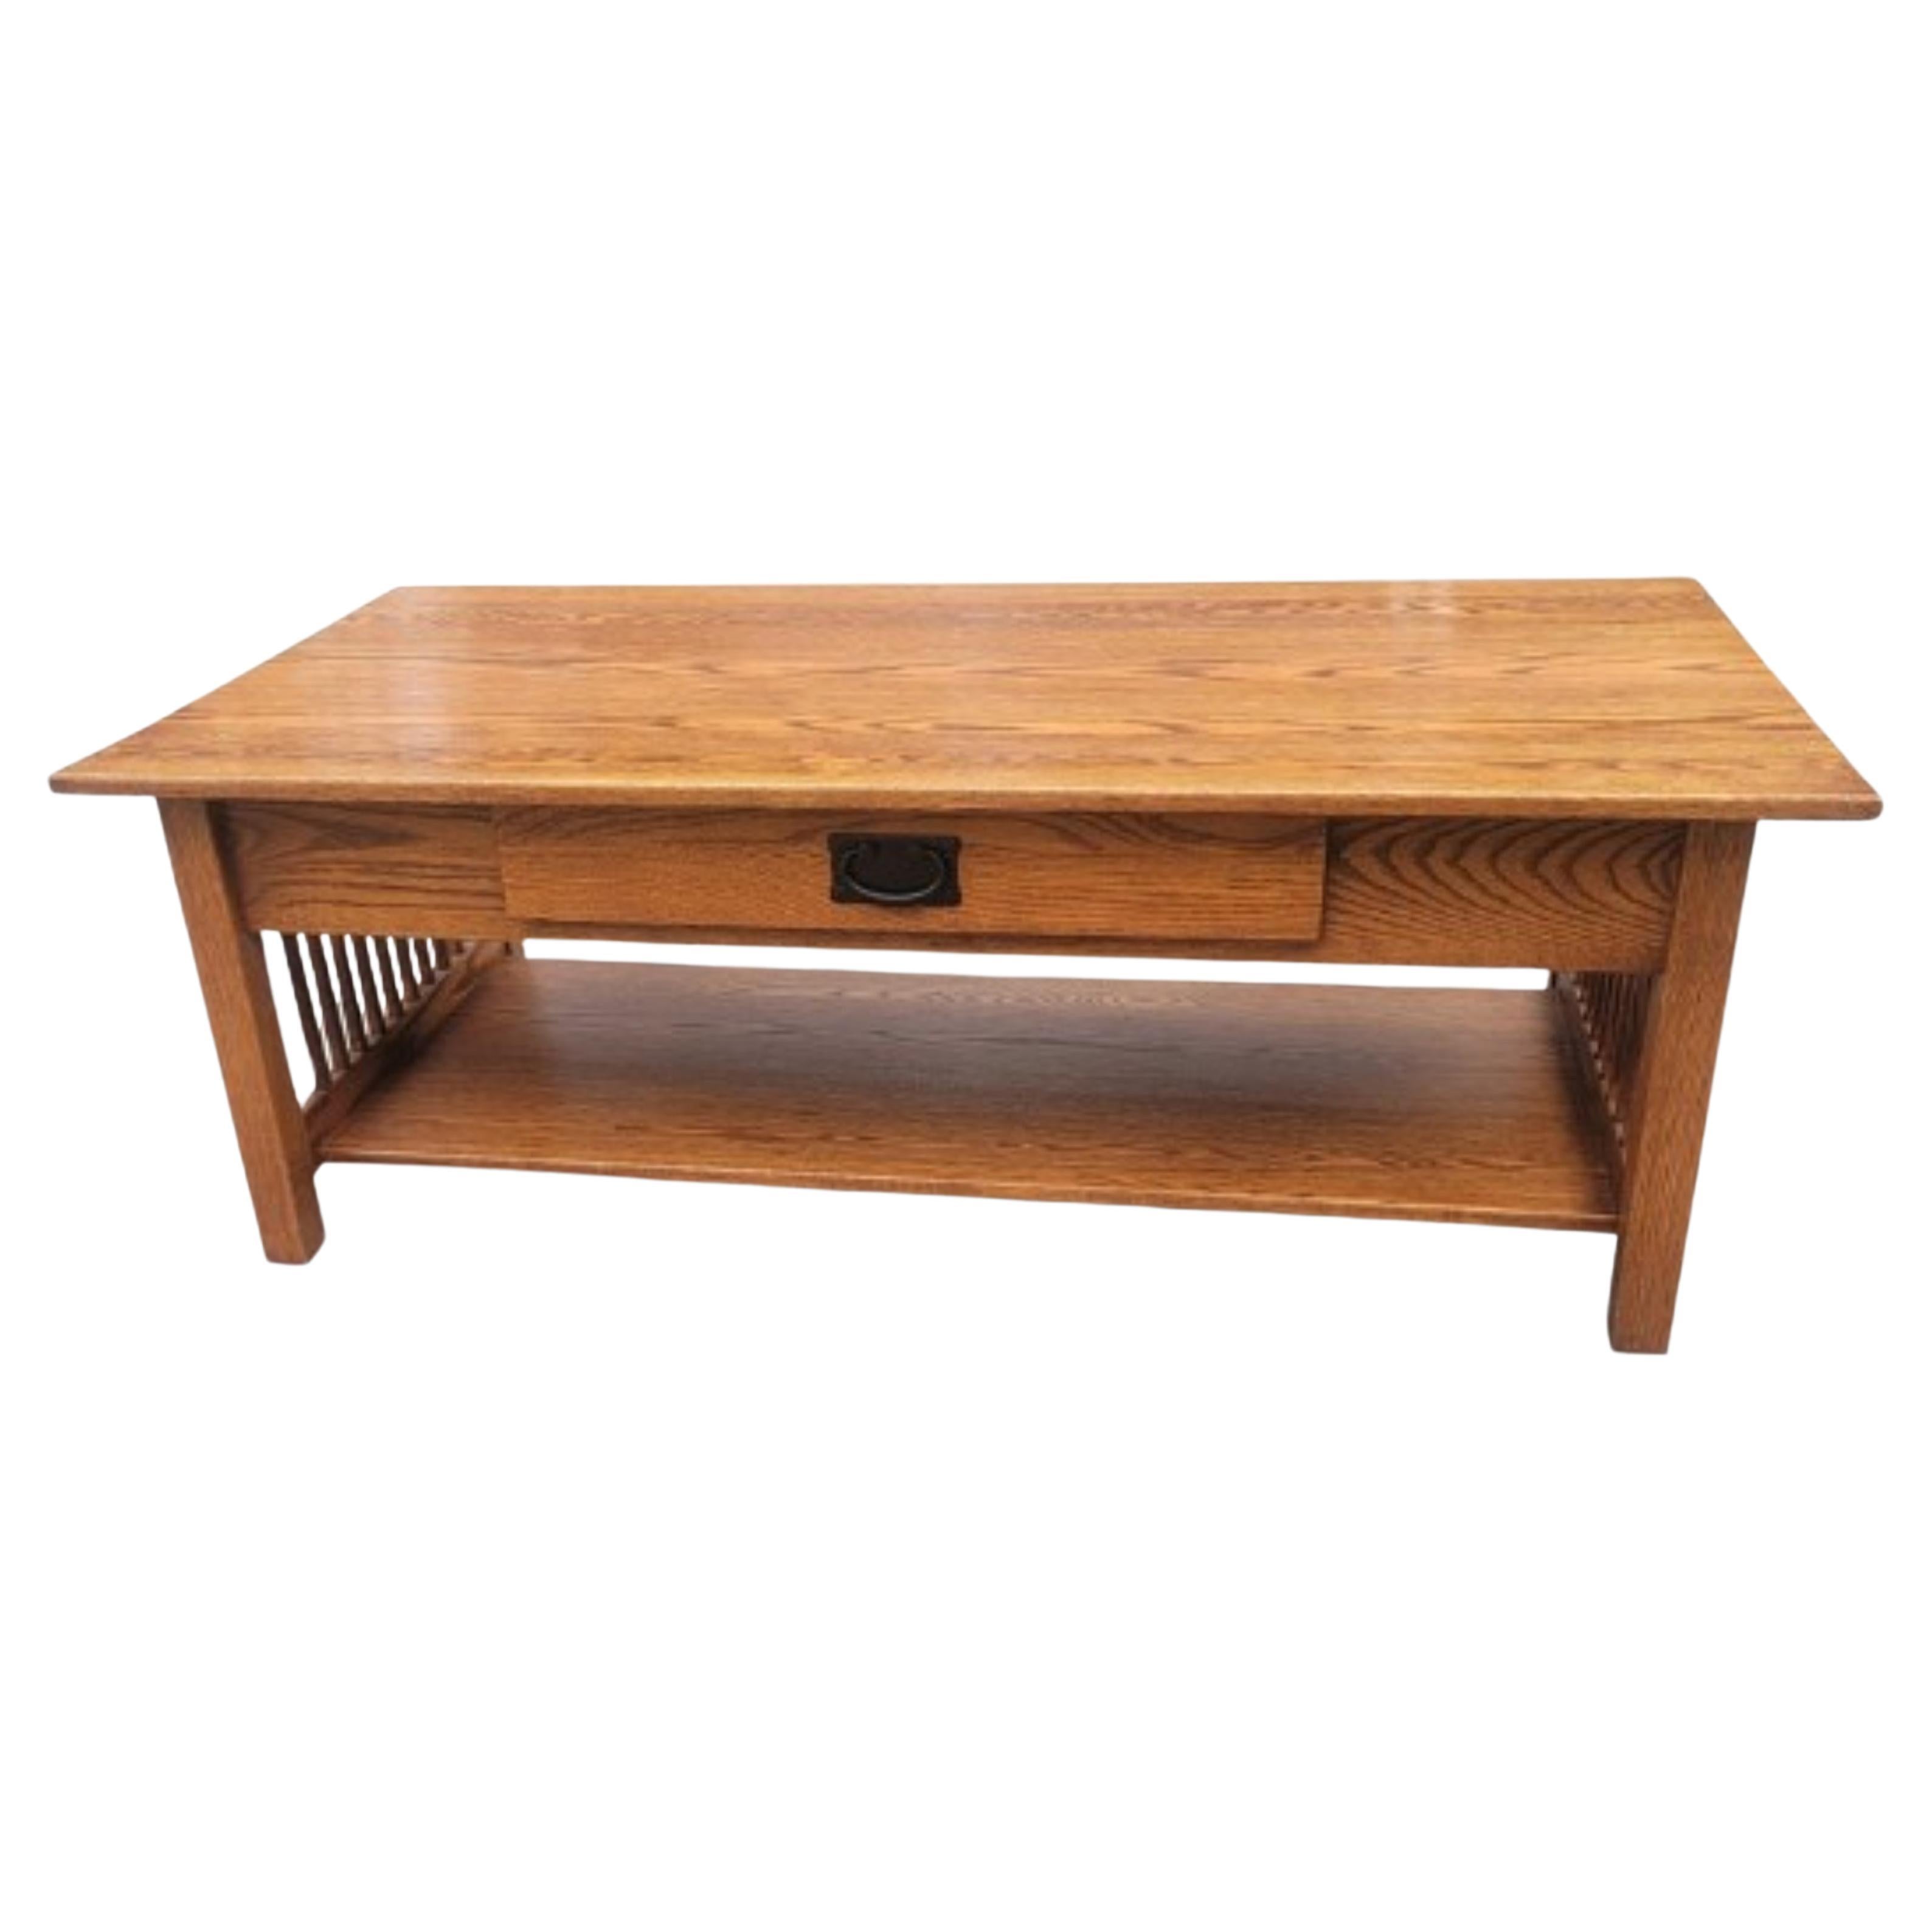 A solid Amish handcrafted Arts & Crafts style Mission oak coffee or cocktail table by country view woodworking.
Handcrafted in Ohio USA by the finest Amish artisans. Rock solid tables in excellent vintage condition. 
Measures 50